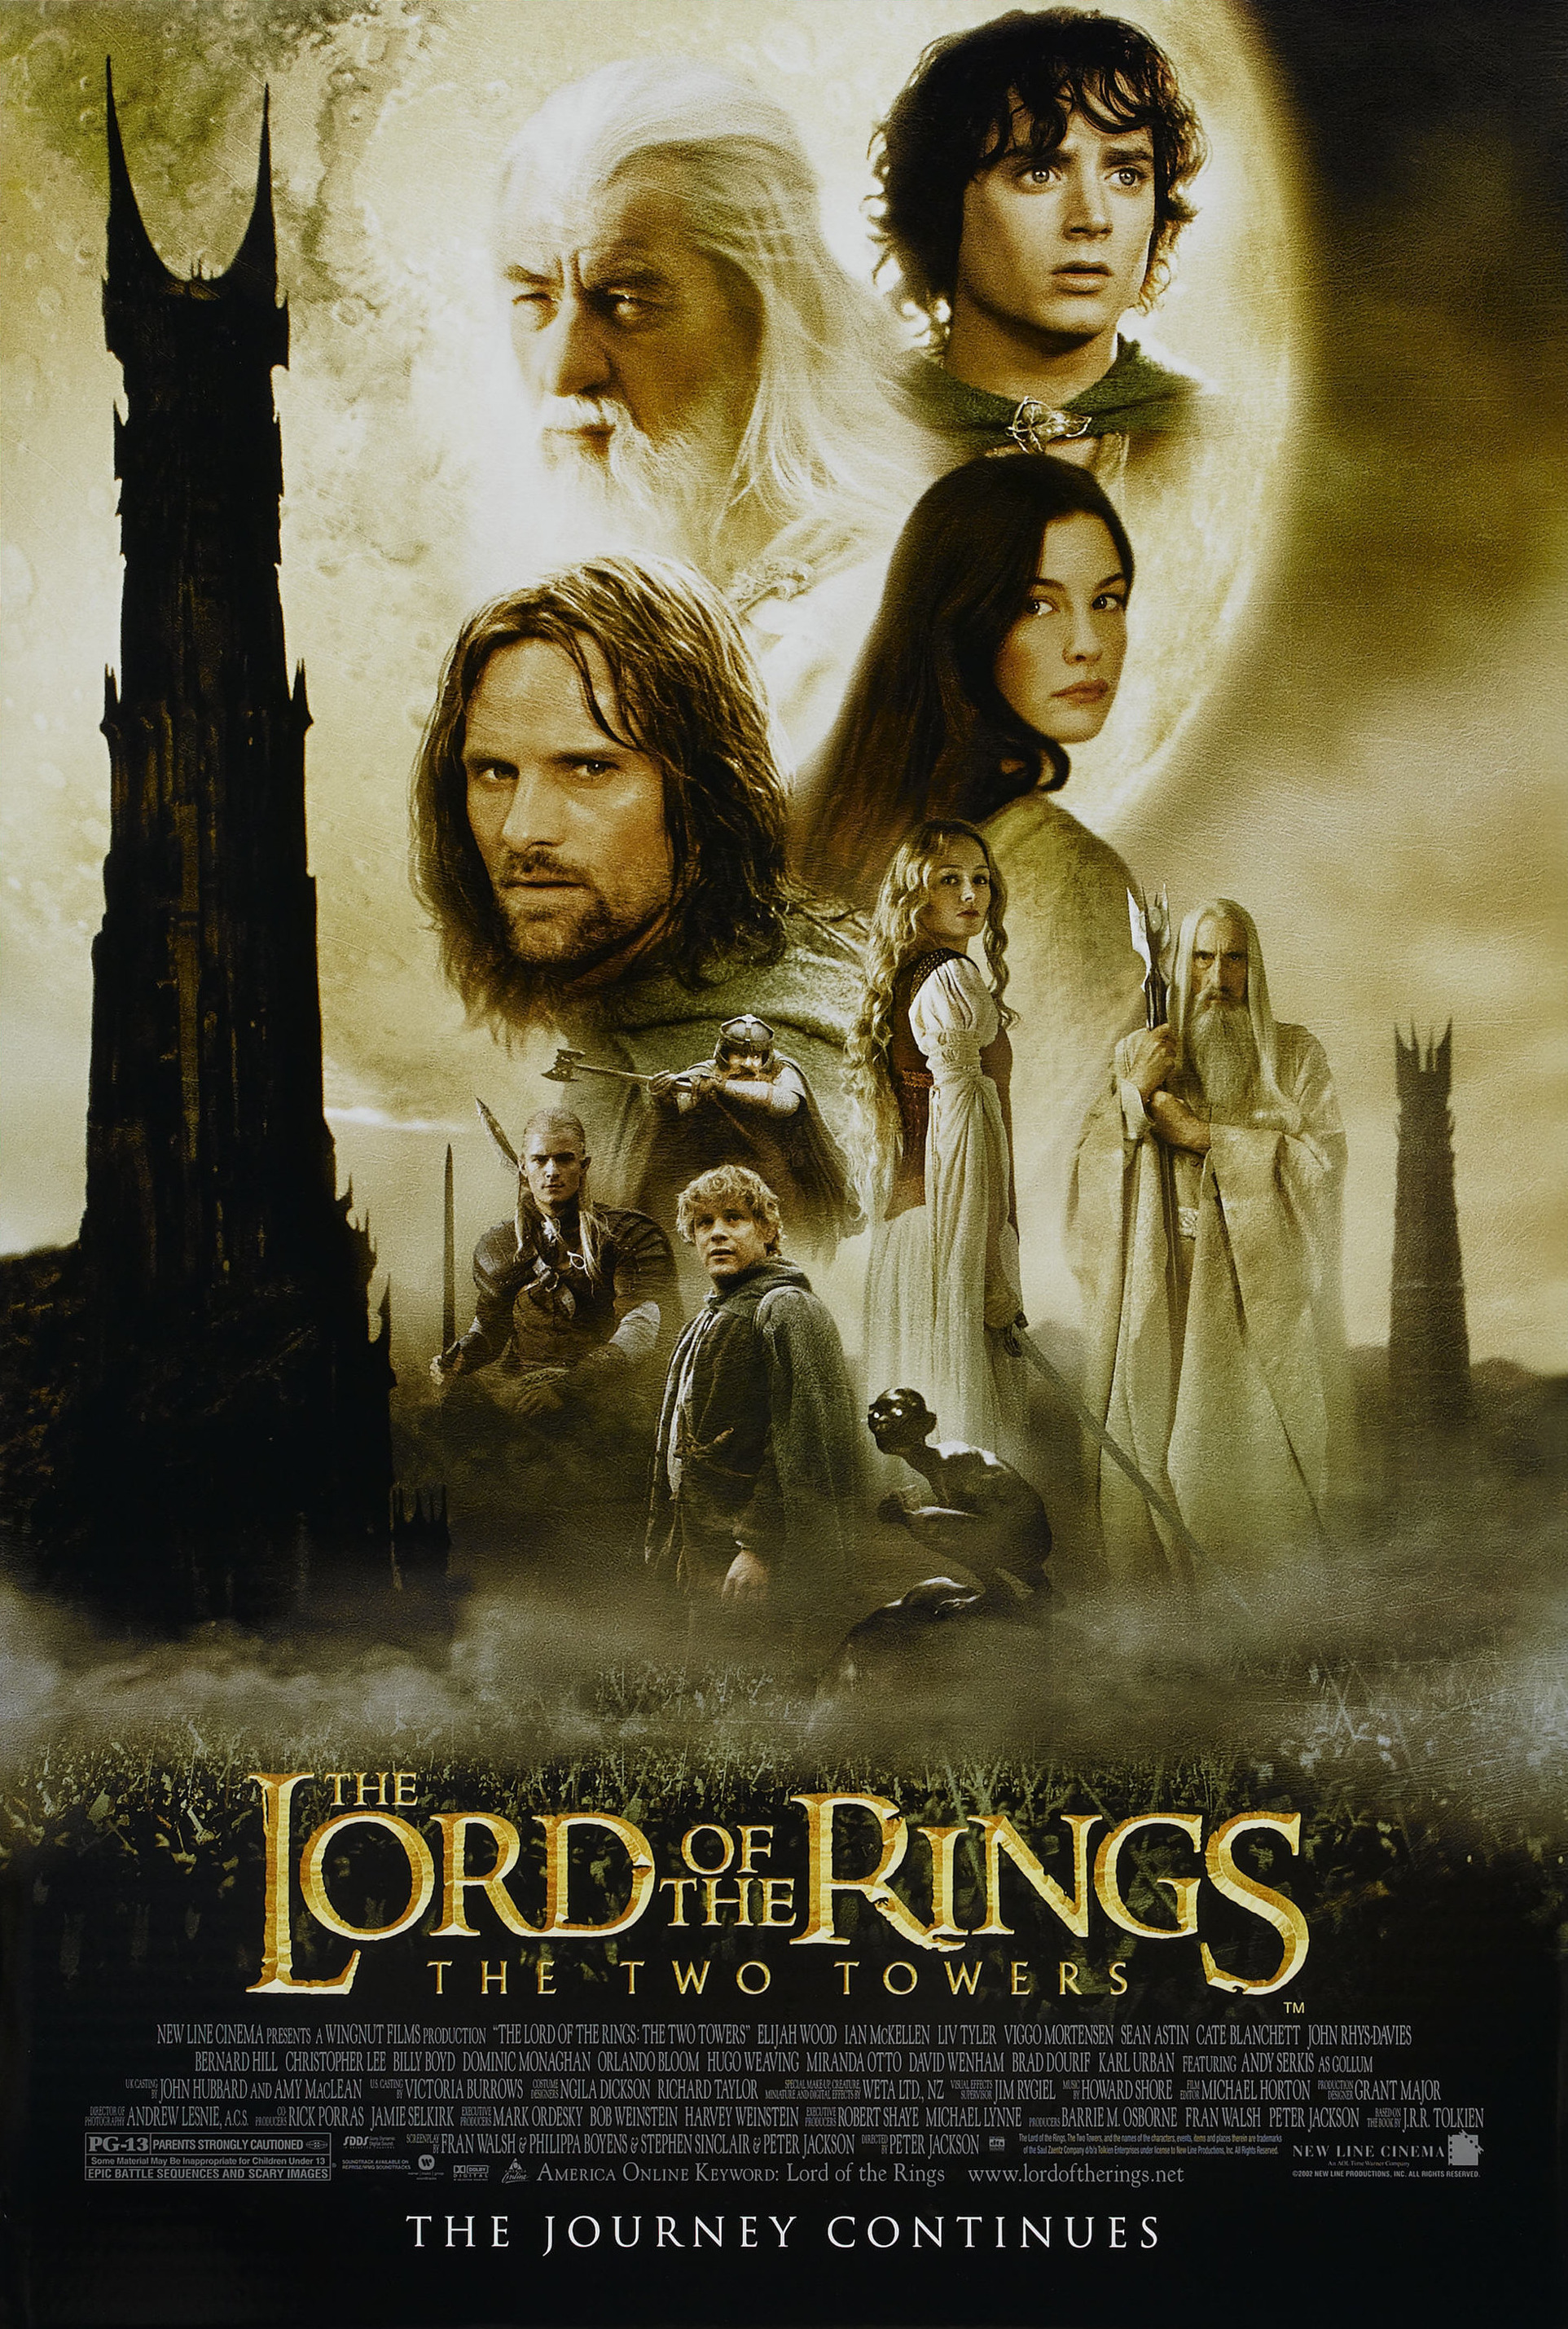 The Fellowship of the Ring: Being the First Part of The Lord of the Rings  (The Lord of the Rings, 1)